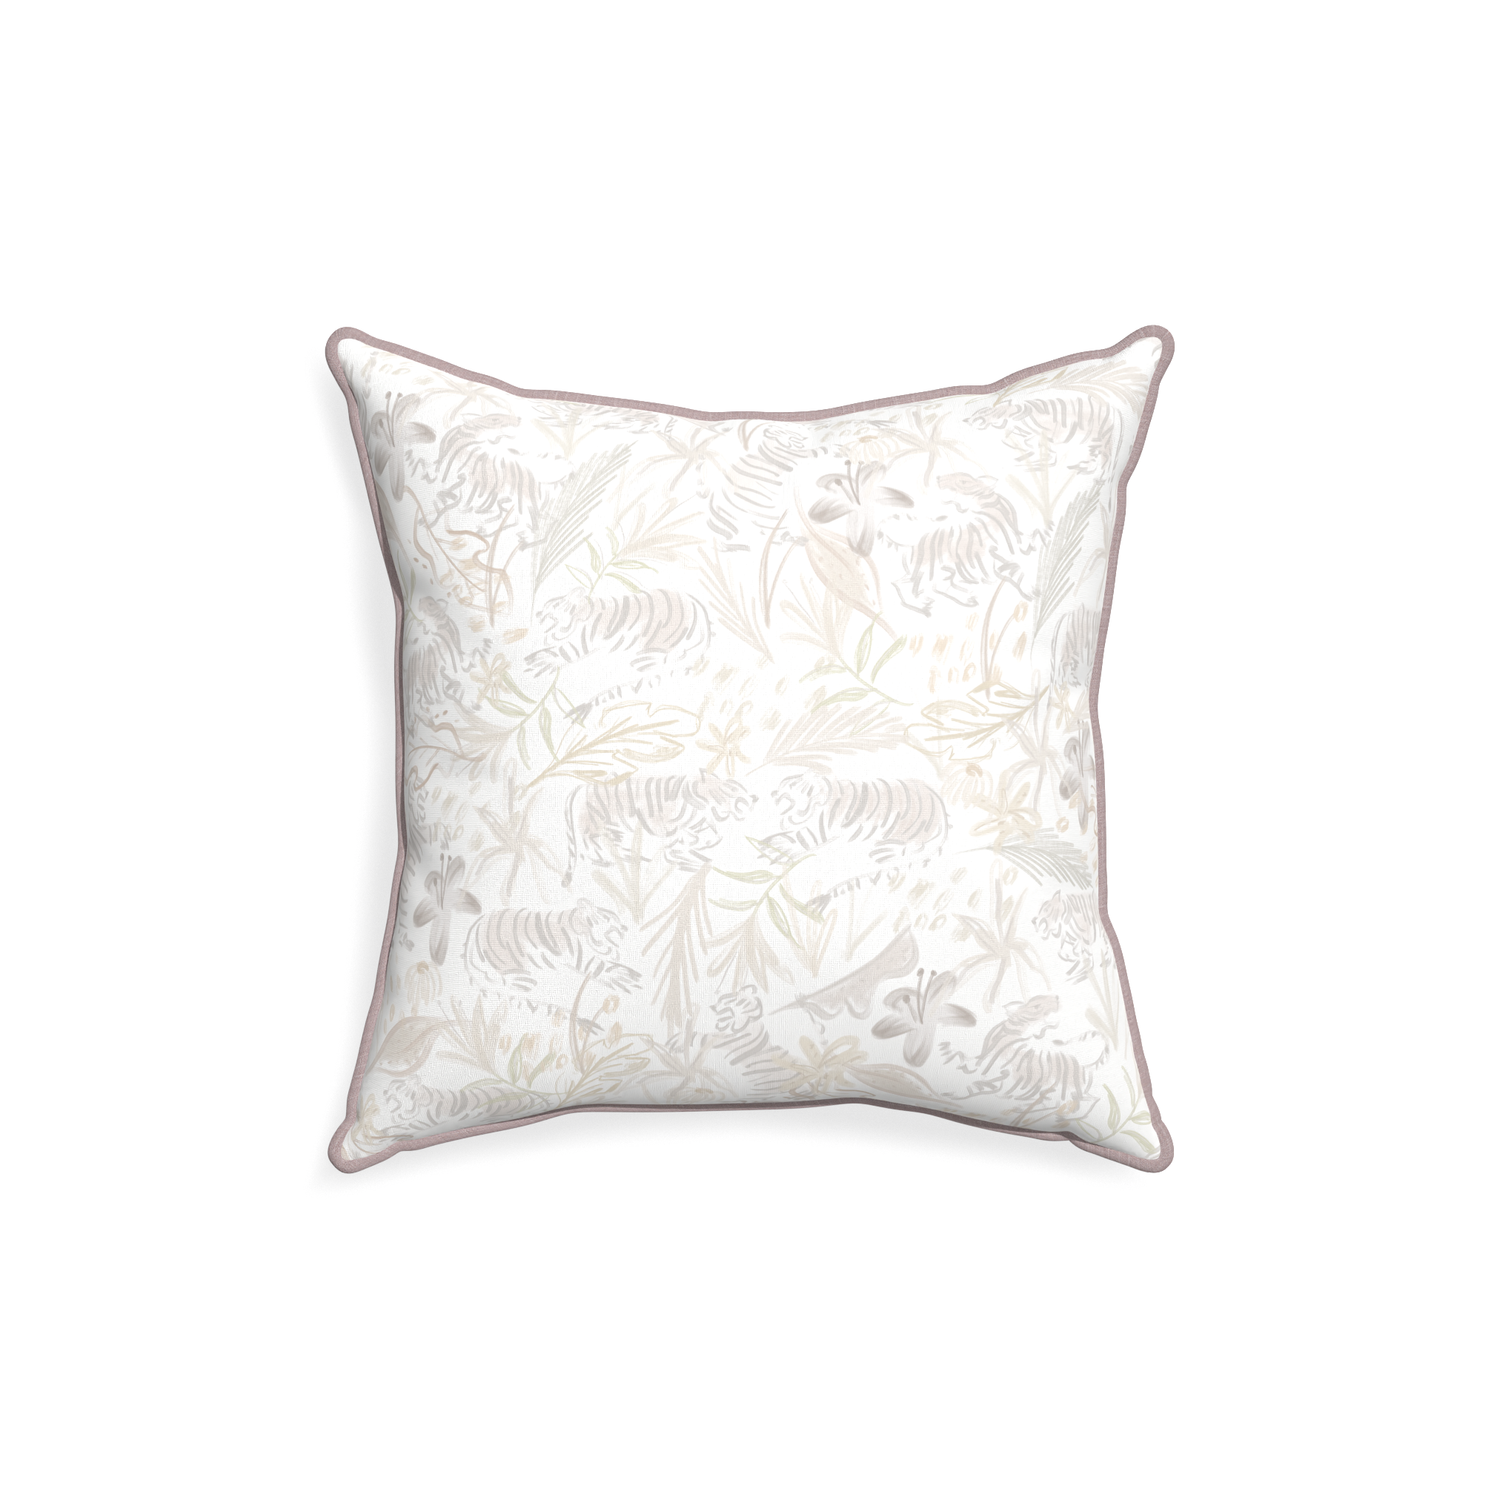 18-square frida sand custom beige chinoiserie tigerpillow with orchid piping on white background